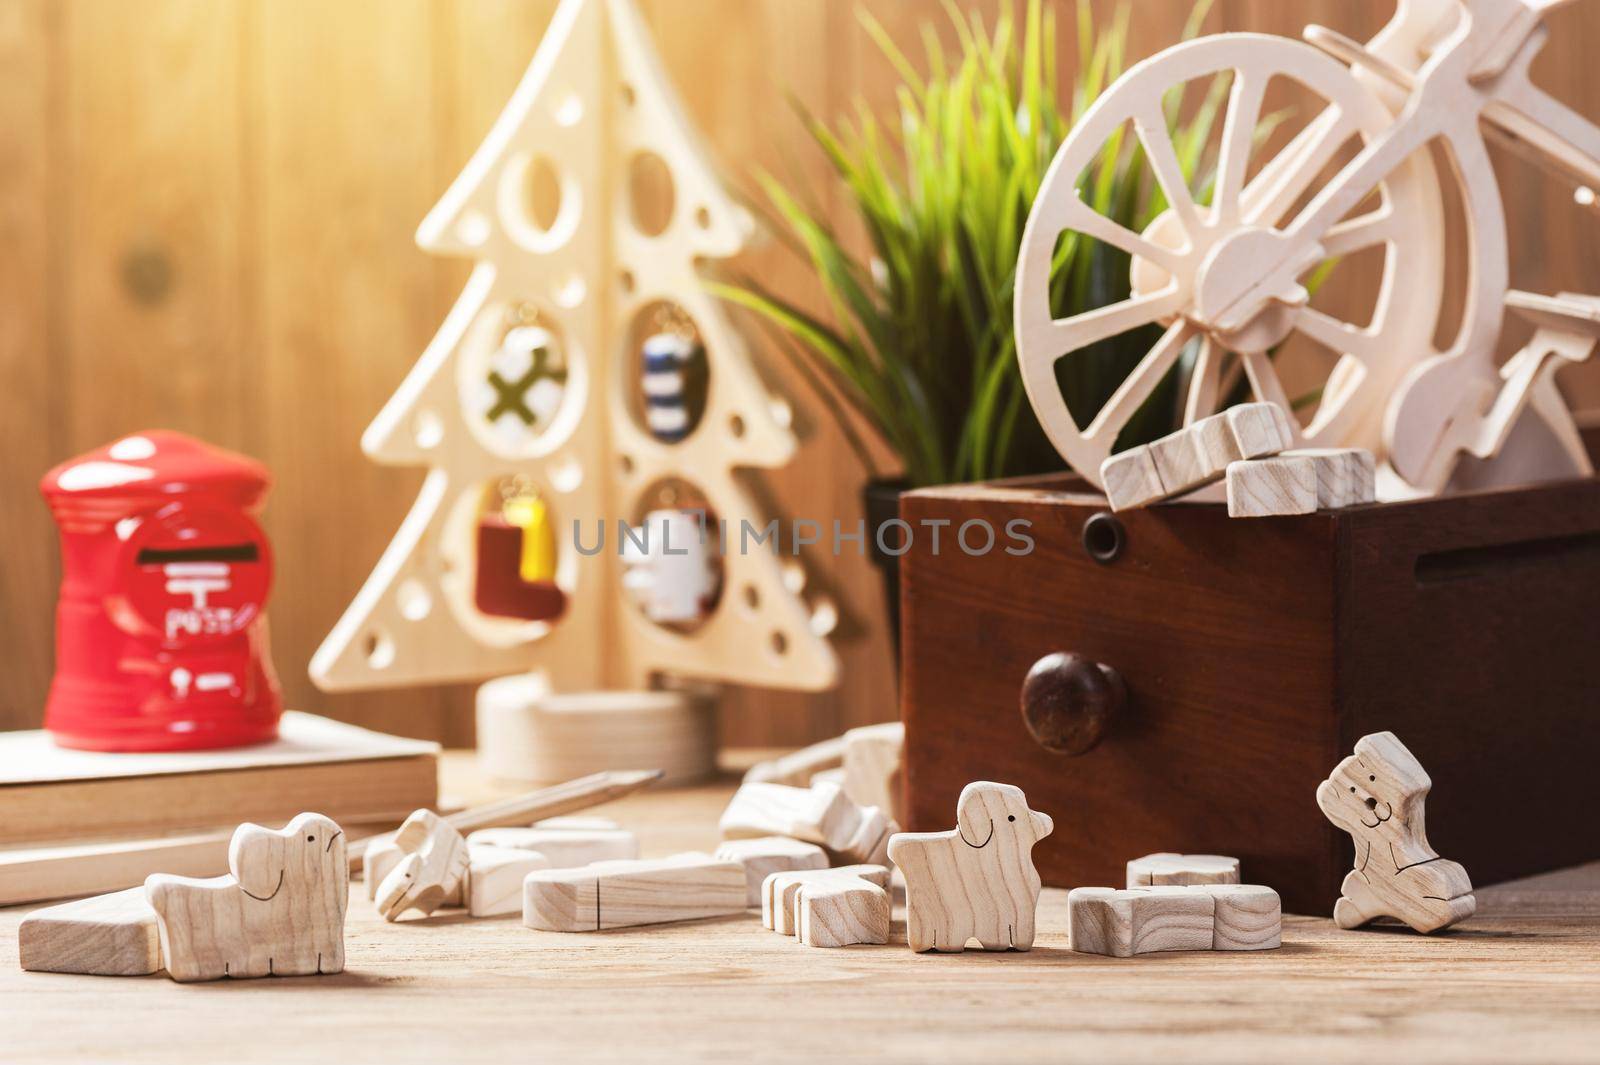 cute wooden toy animal on wood board, tiny toys and shallow depth of field